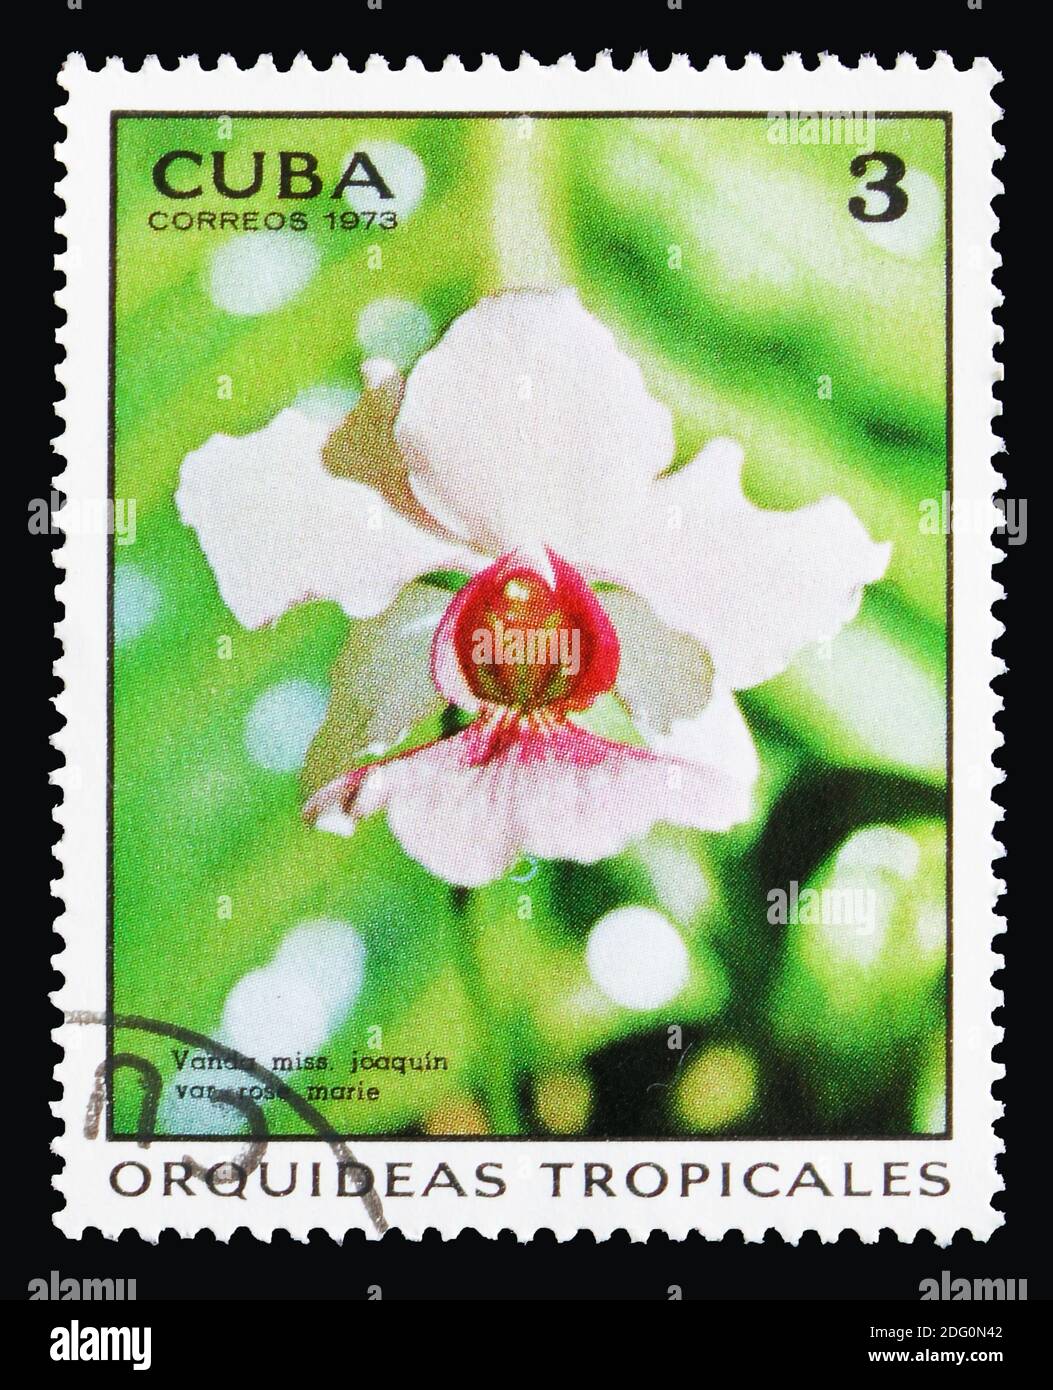 MOSCOW, RUSSIA - AUGUST 18, 2018: A stamp printed in Cuba shows Vanda miss. Joaquin var. Rose marie, Orchids serie, circa 1973 Stock Photo